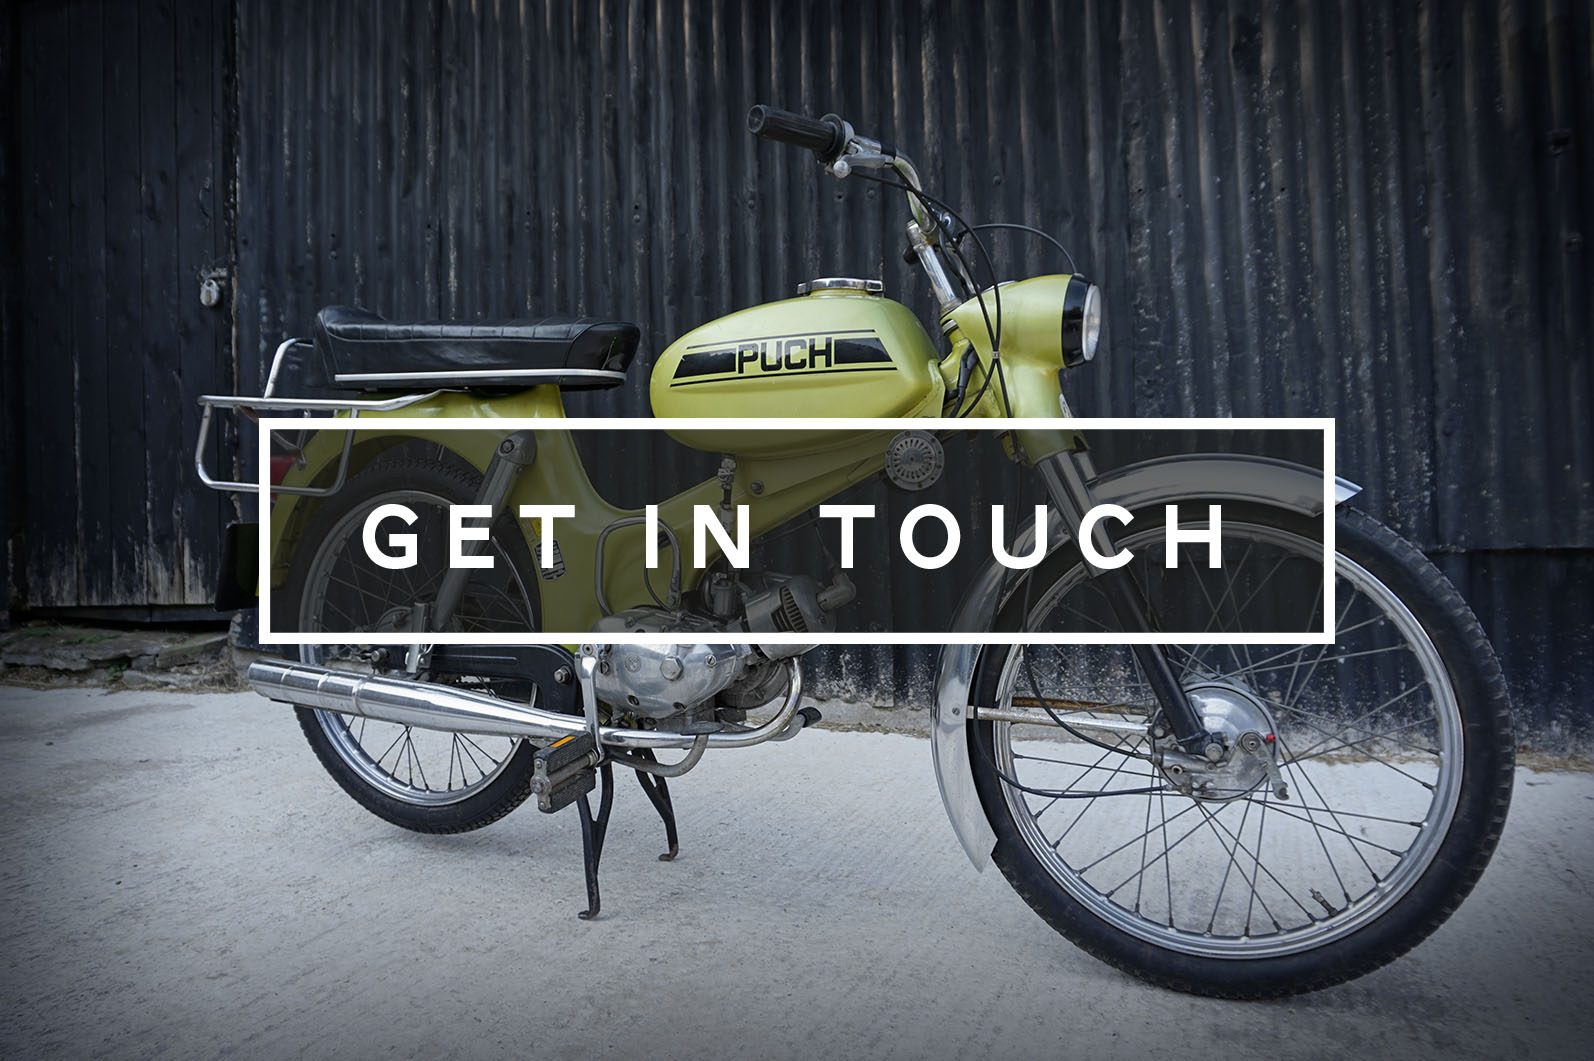 get-in-touch-puch